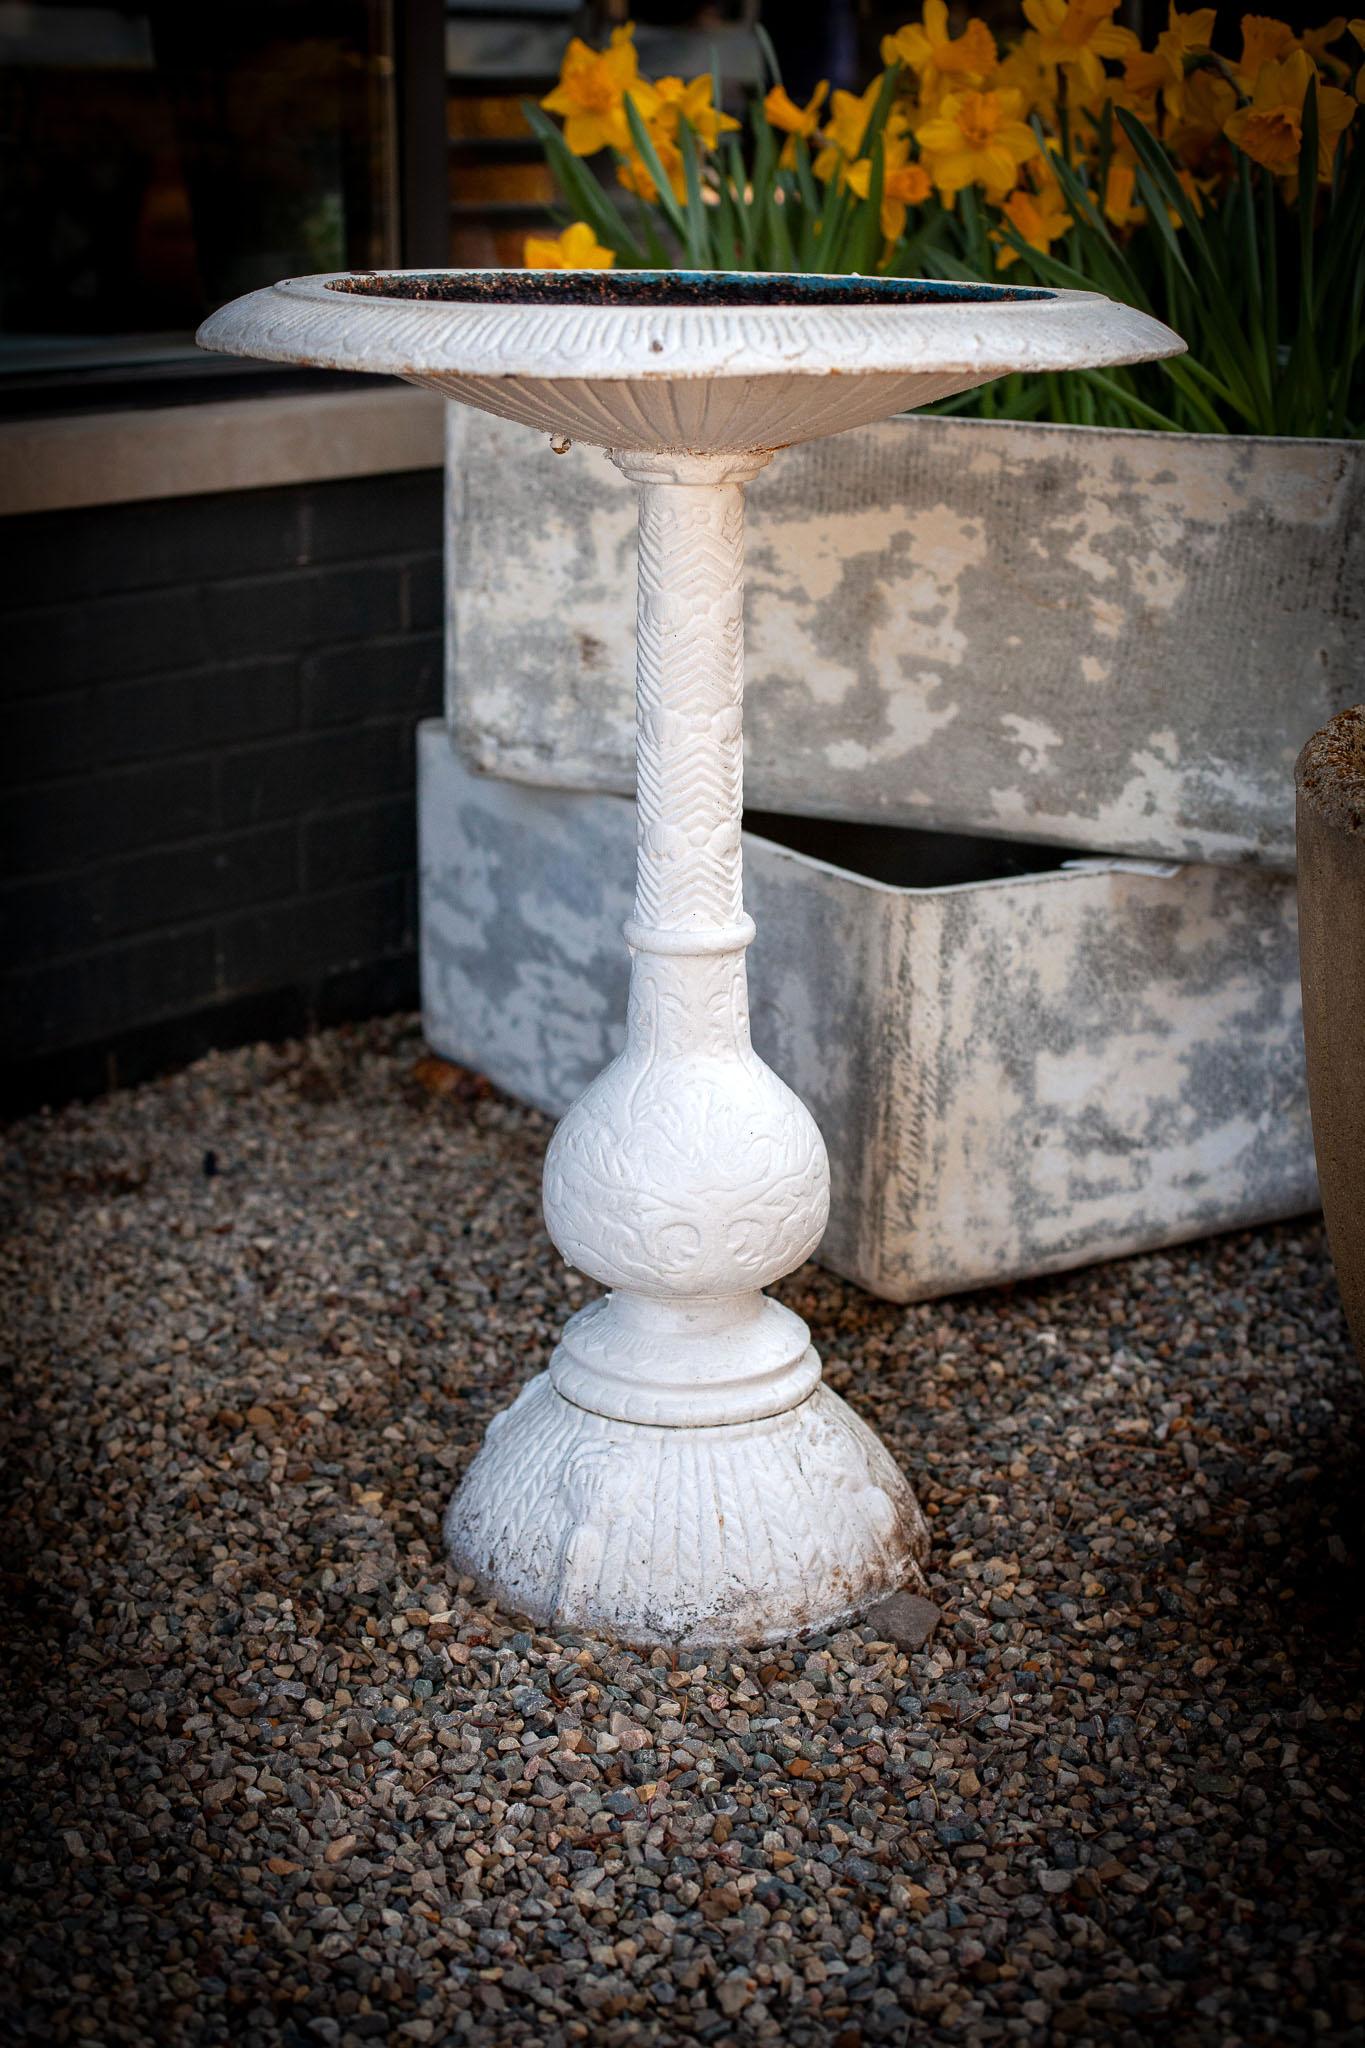 fleurdetroit presents for your consideration, this refined and delicate, iron birdbath with its wonderful cast motifs. It is the perfect accent for any garden or intimate garden room. 